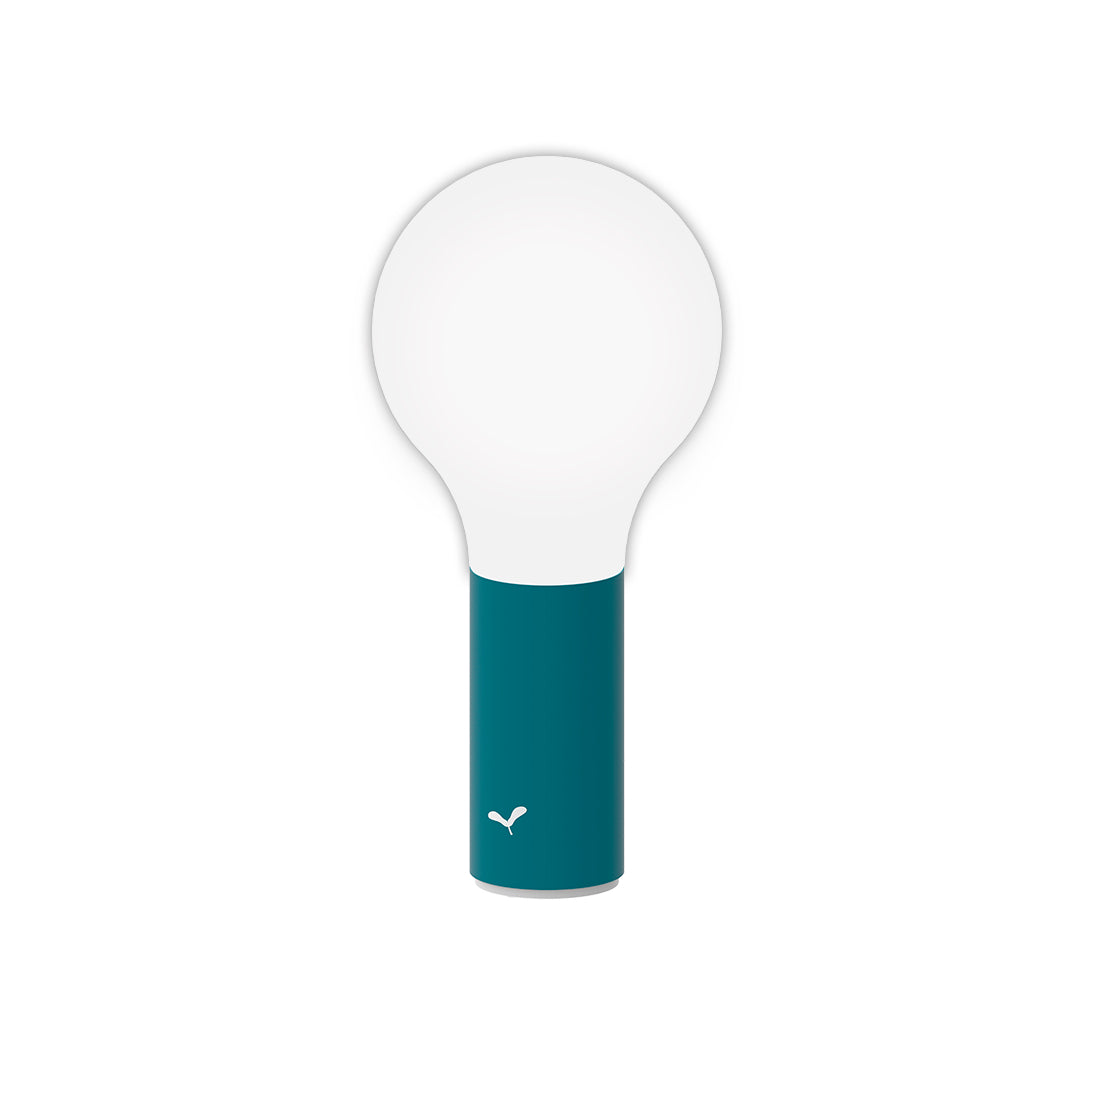 Fermob Aplô portable indoor and outdoor Lamp in Acapulco Blue in front of a white background.